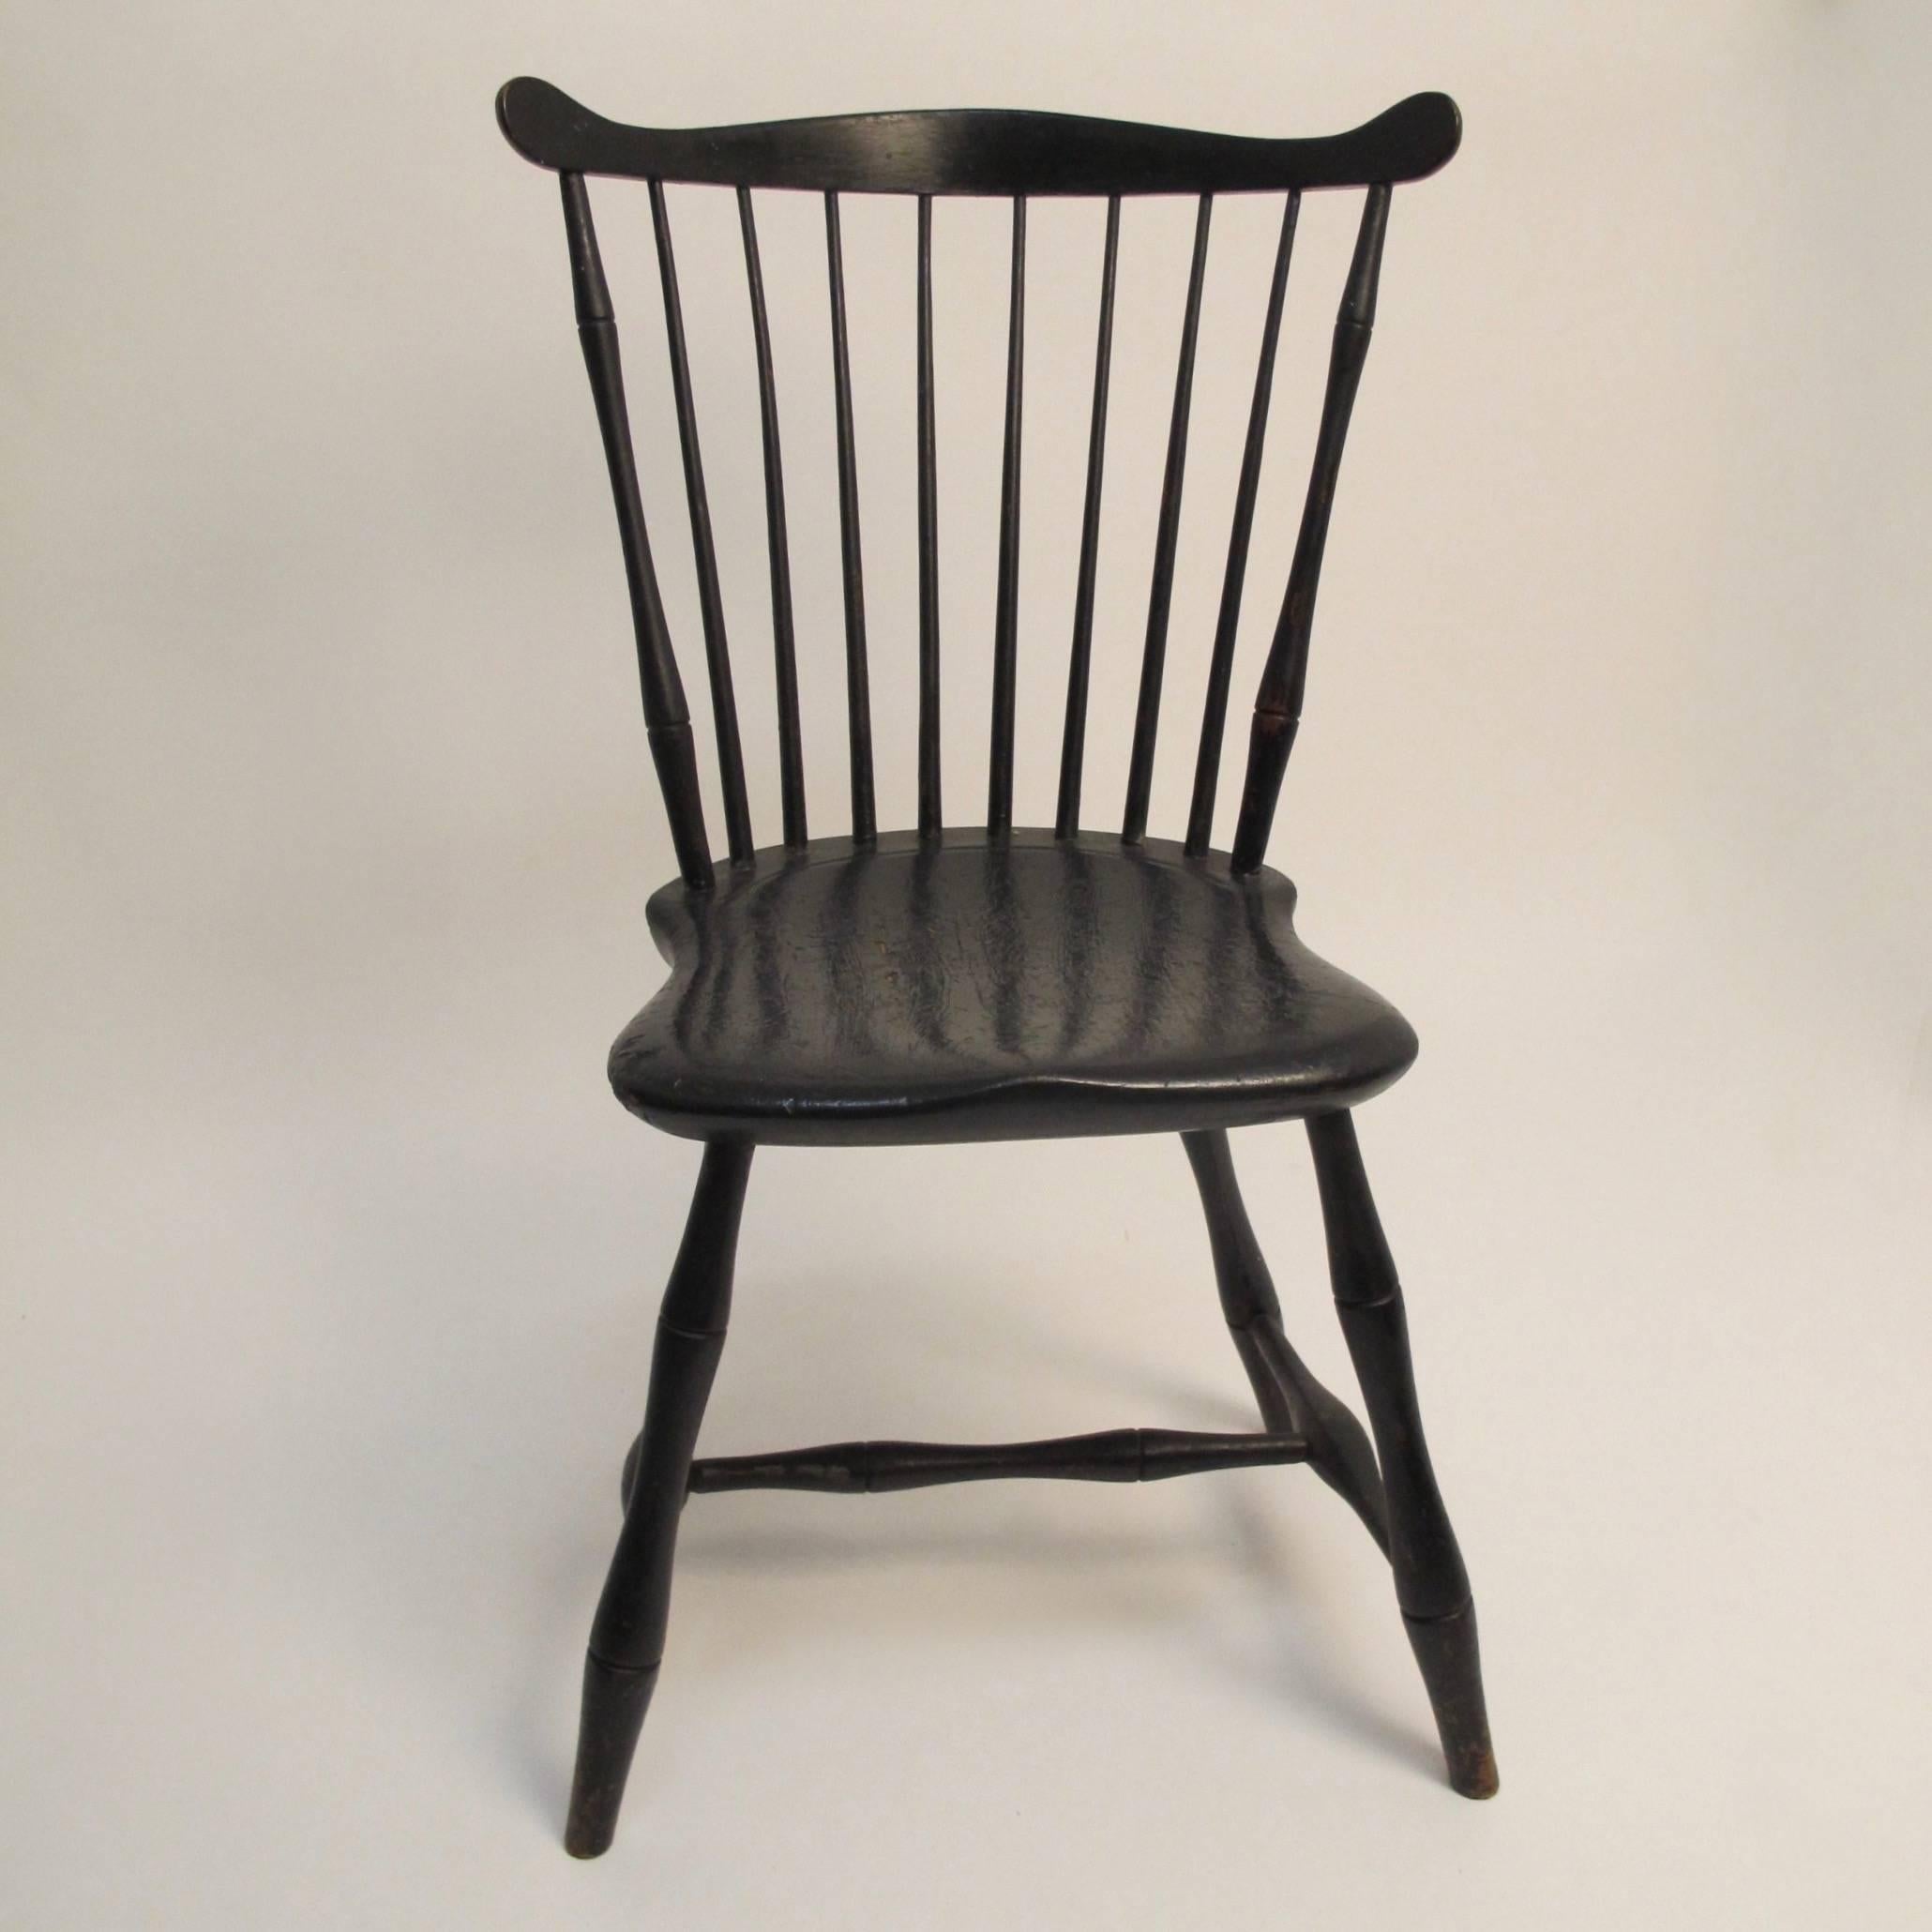 Windsor chair with old (but not original) black paint, American, early 19th century.